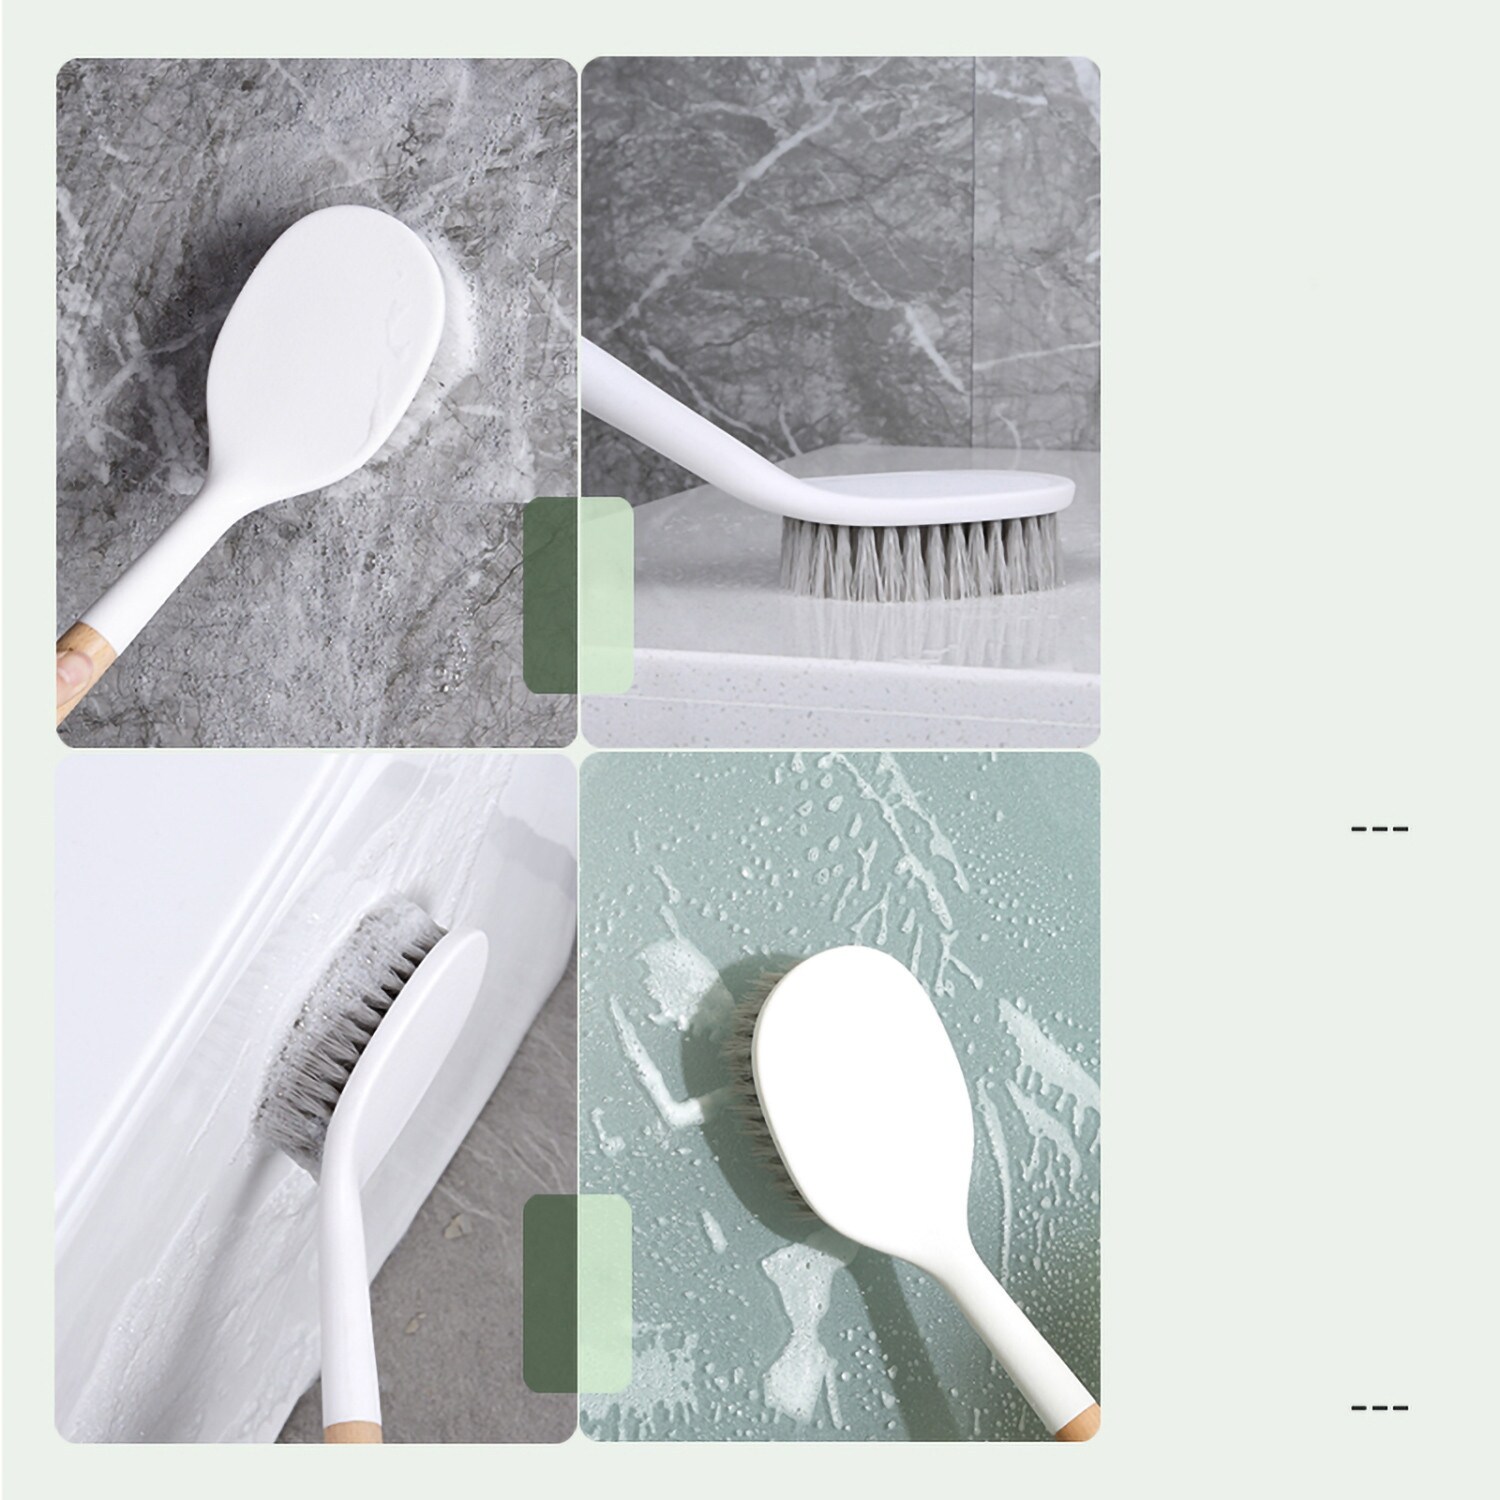 https://ak1.ostkcdn.com/images/products/is/images/direct/4d38486aeabb394608fe622702c814aa74e845ae/Cleaning-Brush-Beech-Handle-Cleaning-Brush-For-Pans-Pots-Sink-Cleaning.jpg